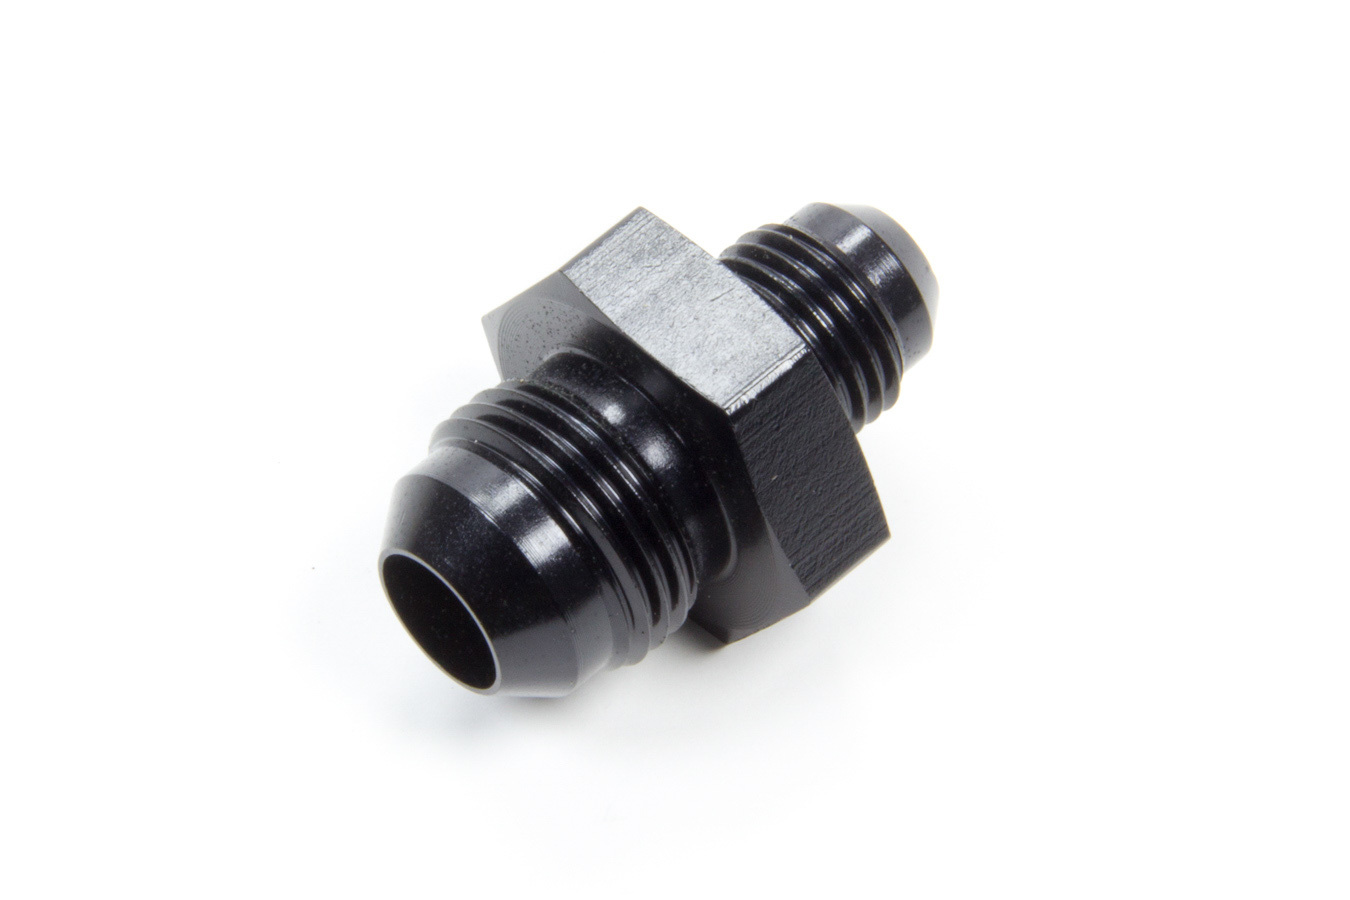 Aeroquip FCM5160 Fitting, Adapter, Straight, 8 AN Male to 6 AN Male, Aluminum, Black Anodized, Each